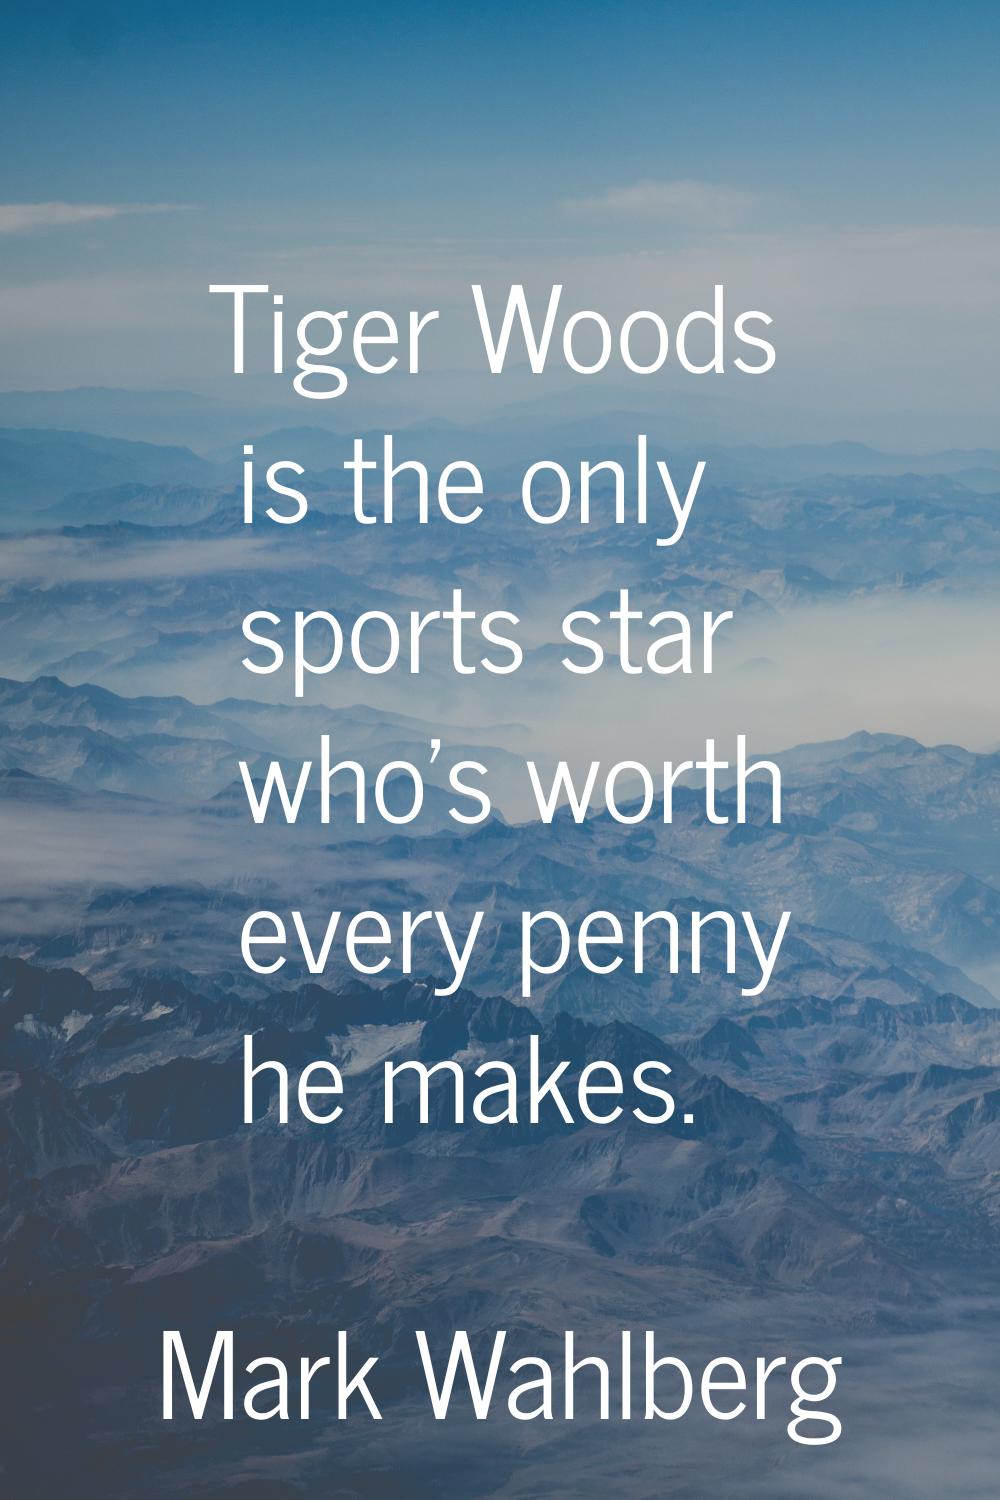 Tiger Woods is the only sports star who's worth every penny he makes.